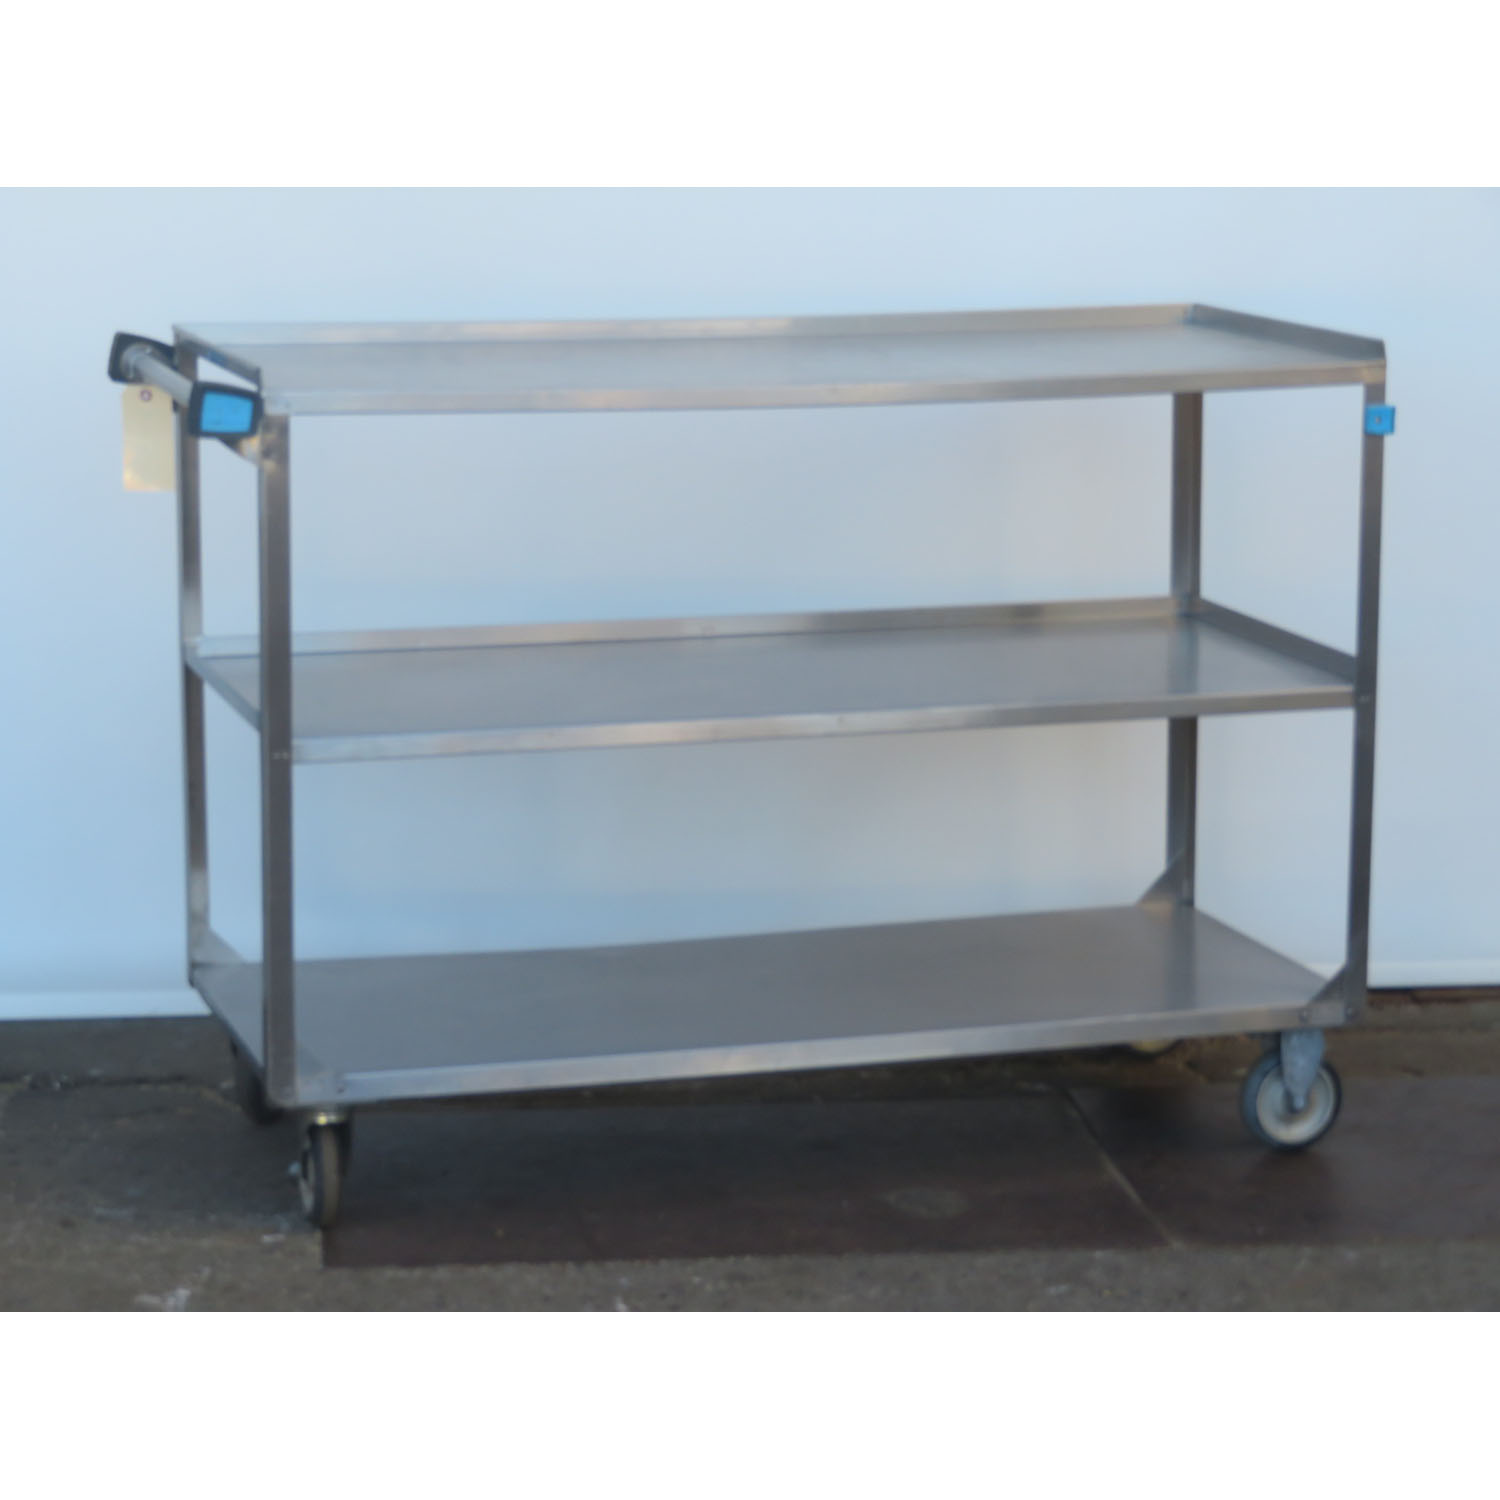 Lakeside 459 Stainless Steel Medium Duty 3 Shelf Utility Cart, Used Great Condition image 1